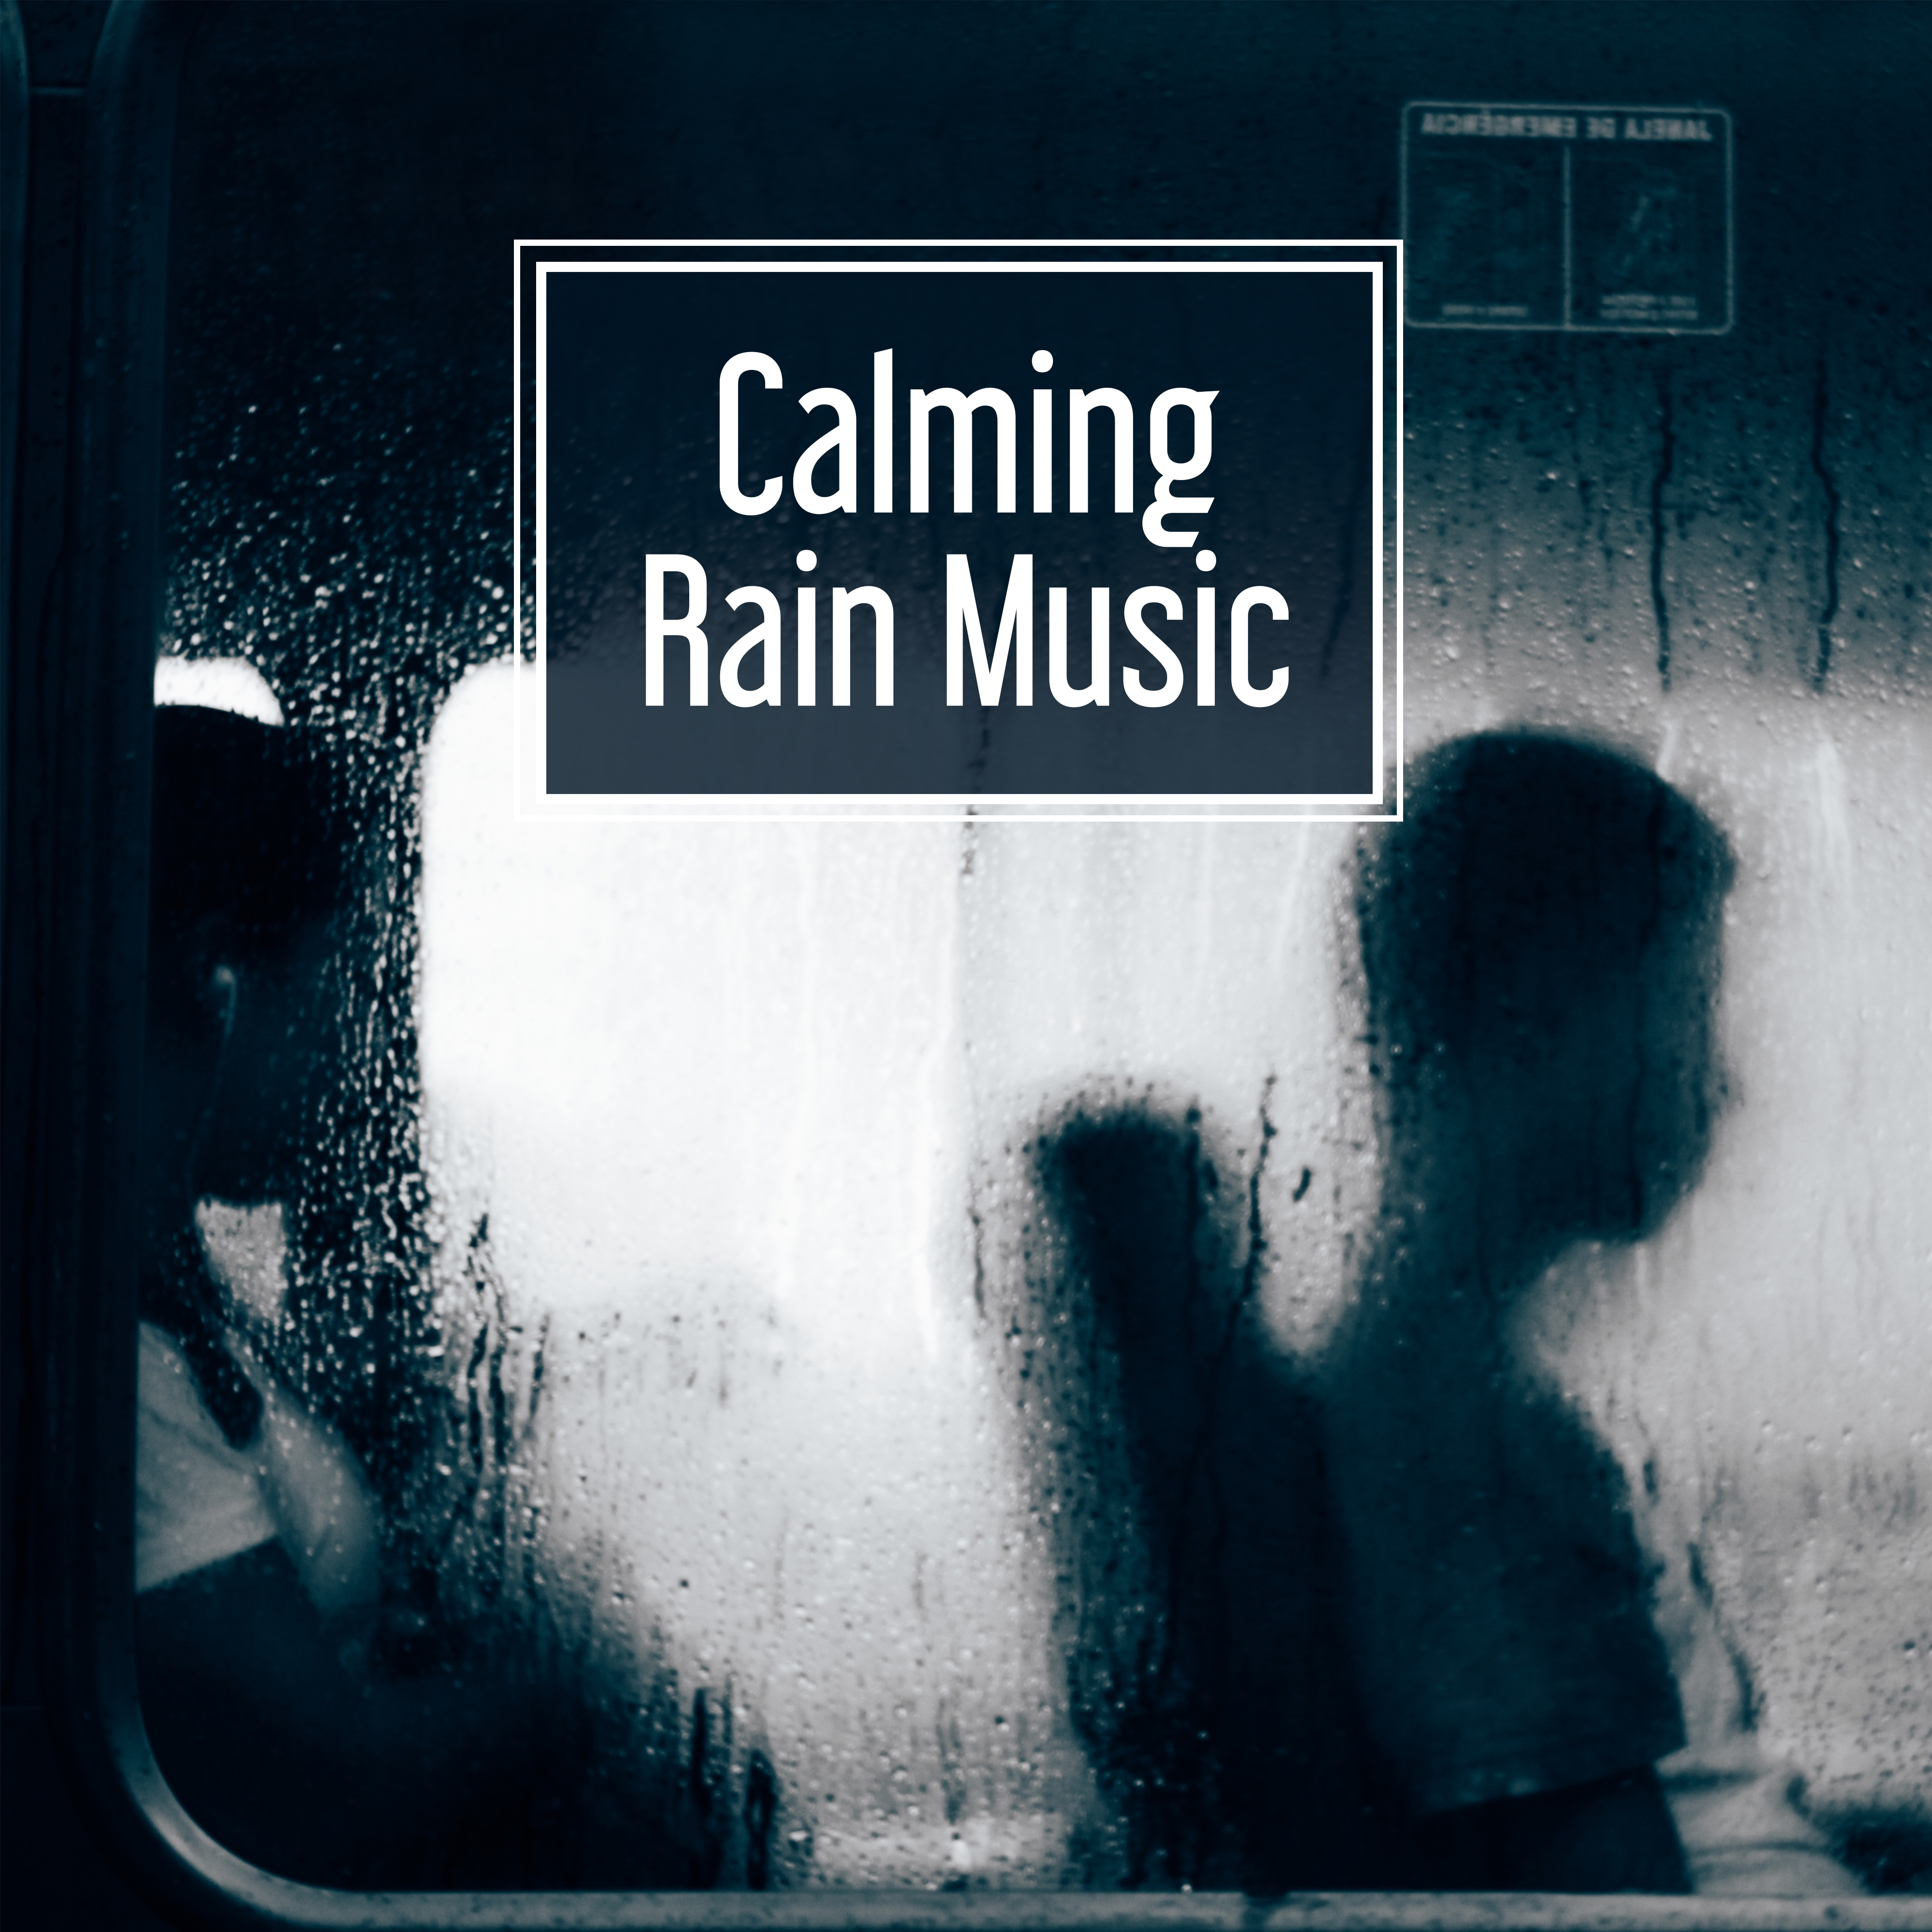 Calming Rain Music  Stress Relief, Calm Down  Relax, Nature Relaxation, Soft Sounds, Peaceful Music